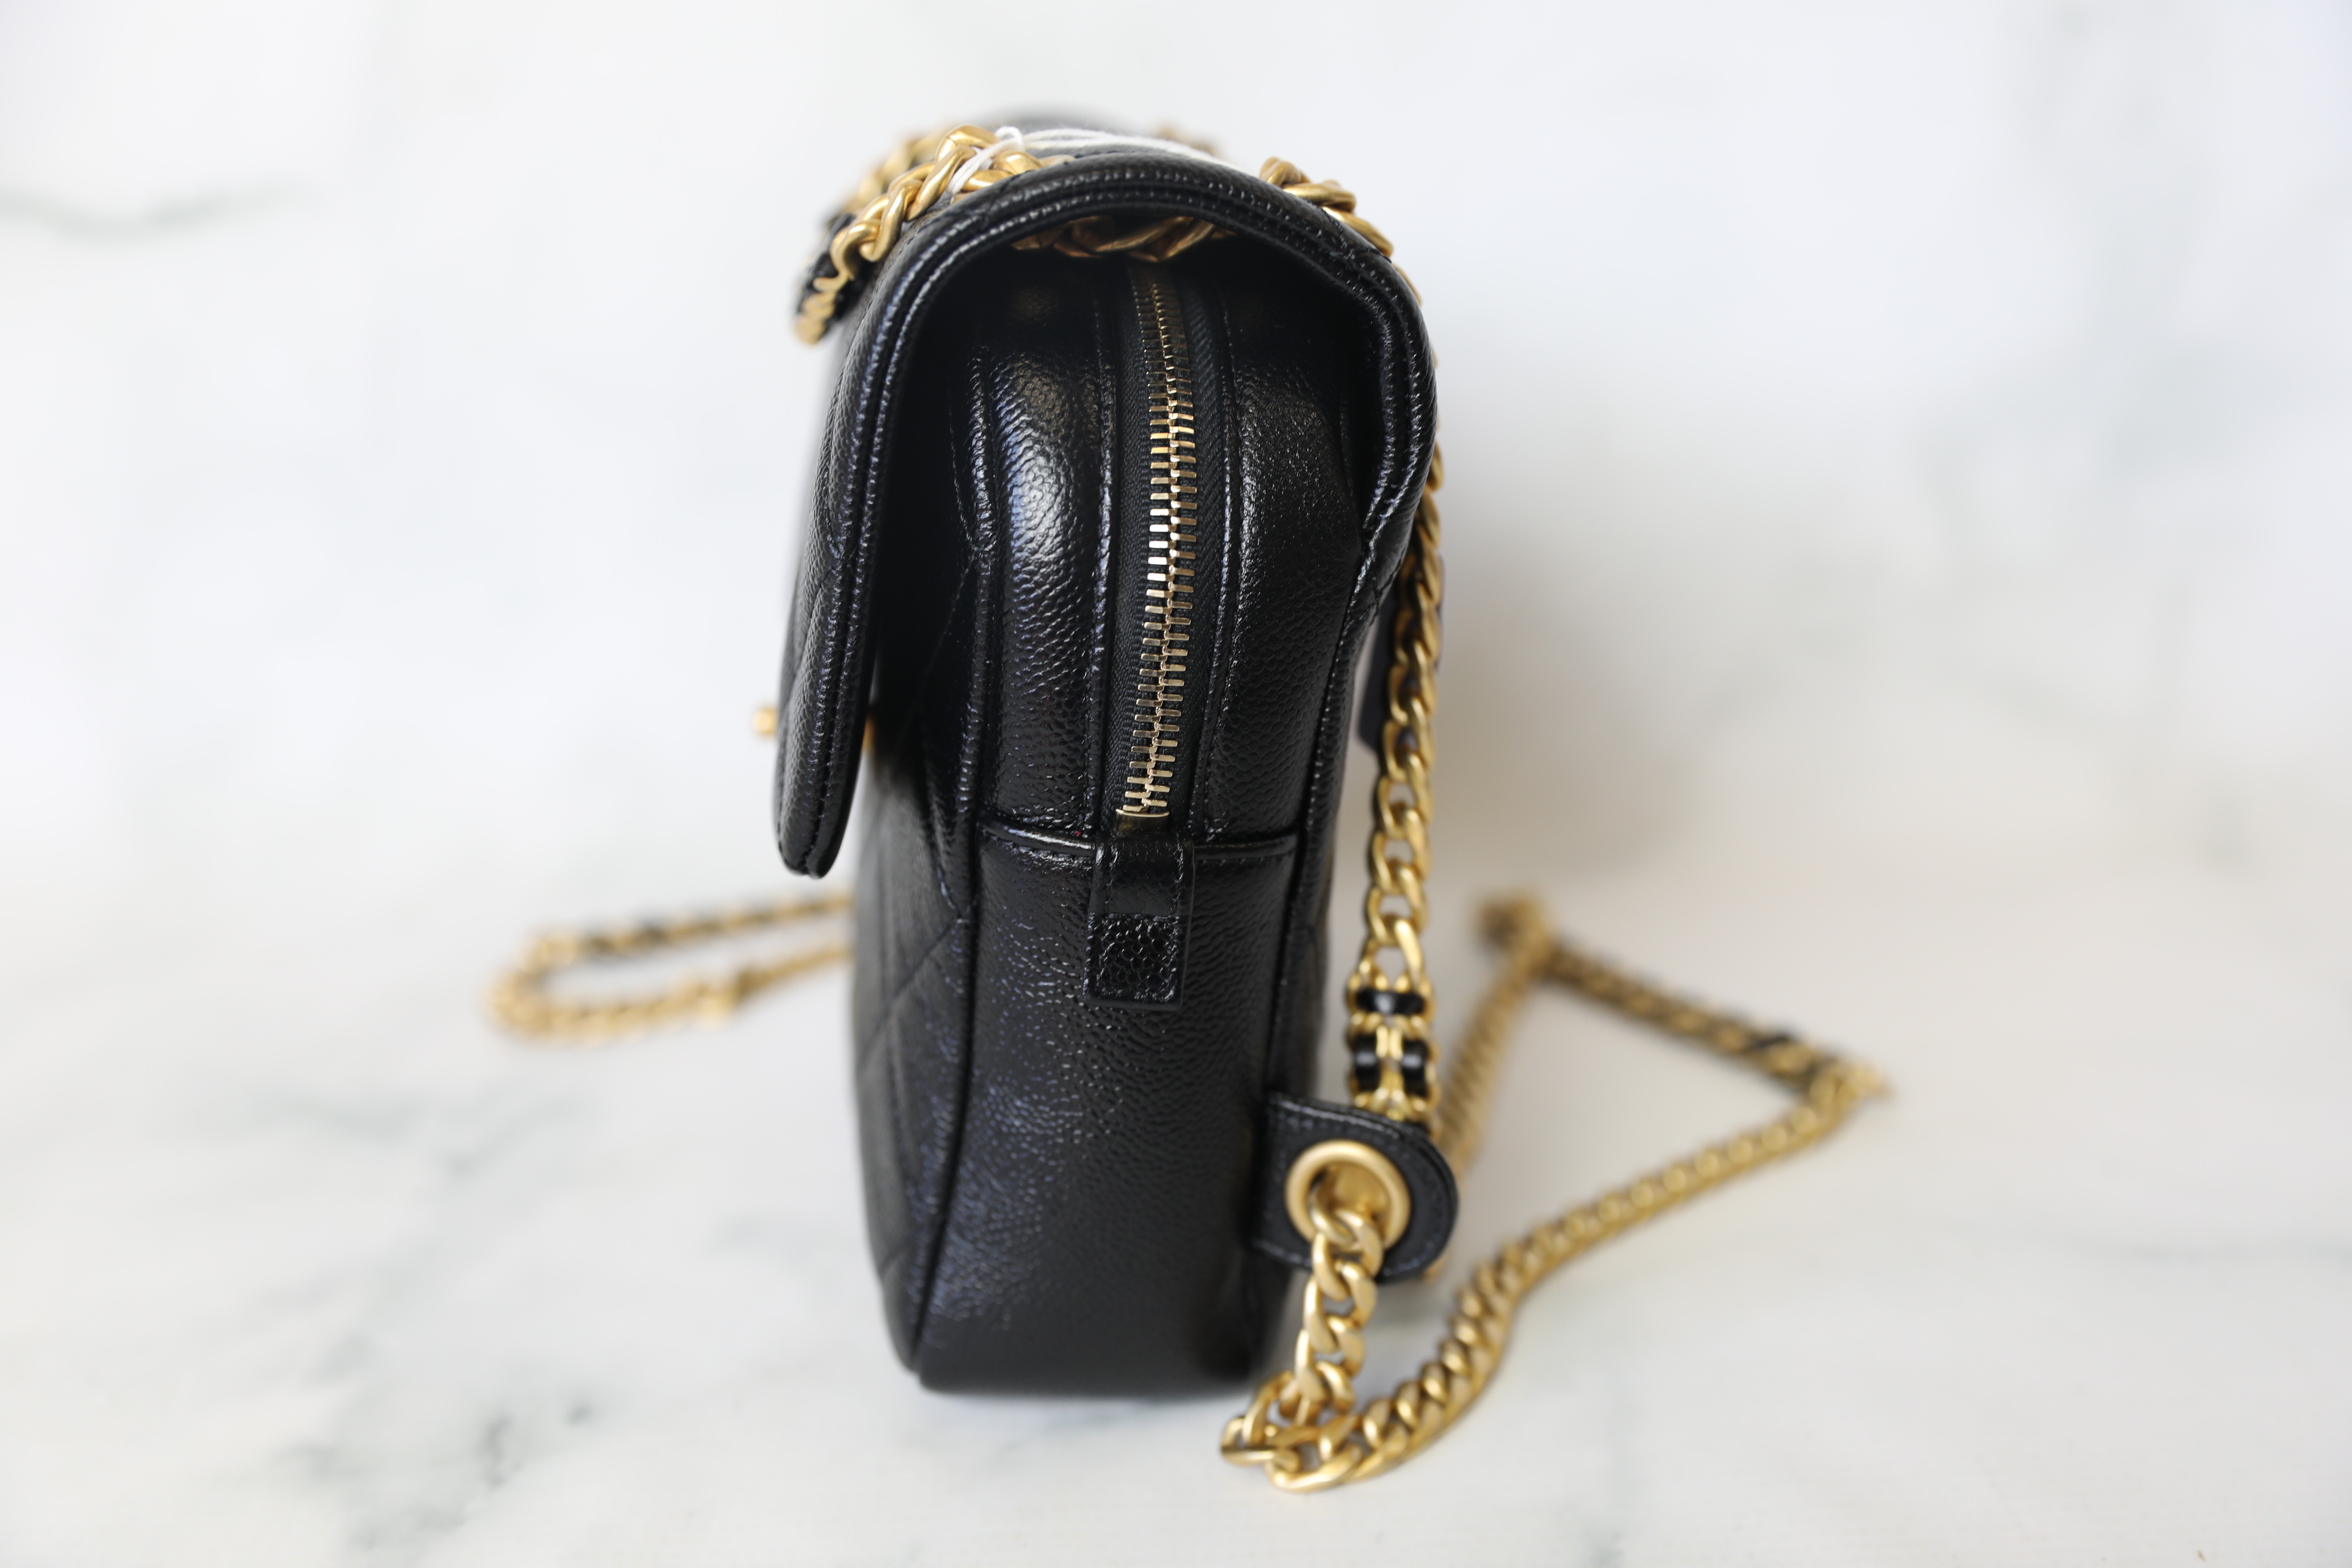 Chanel Melody Backpack, Black Caviar with Gold Hardware, Preowned